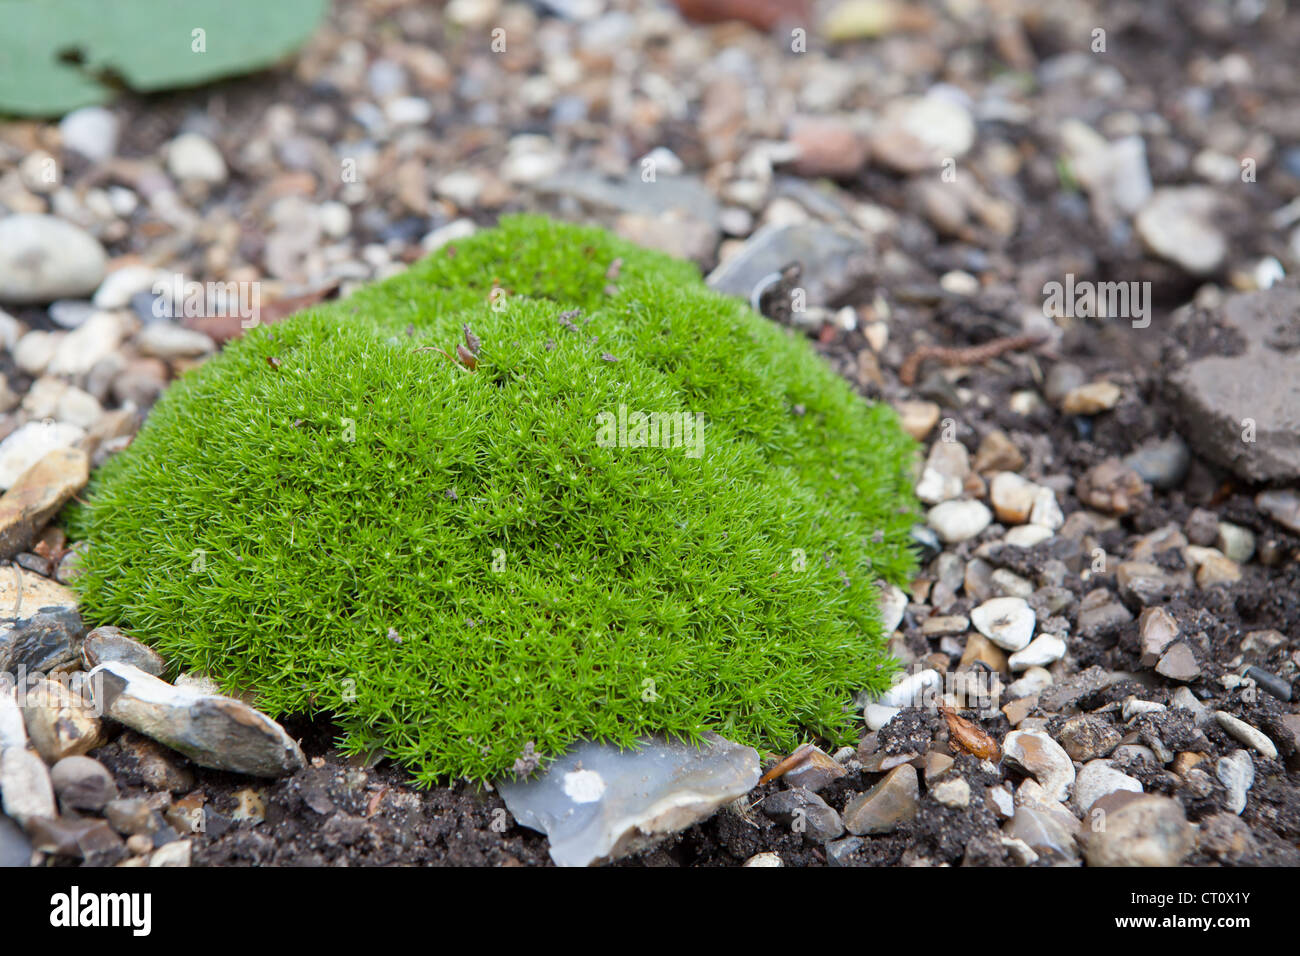 'Cushion plant' growing on the ground Stock Photo